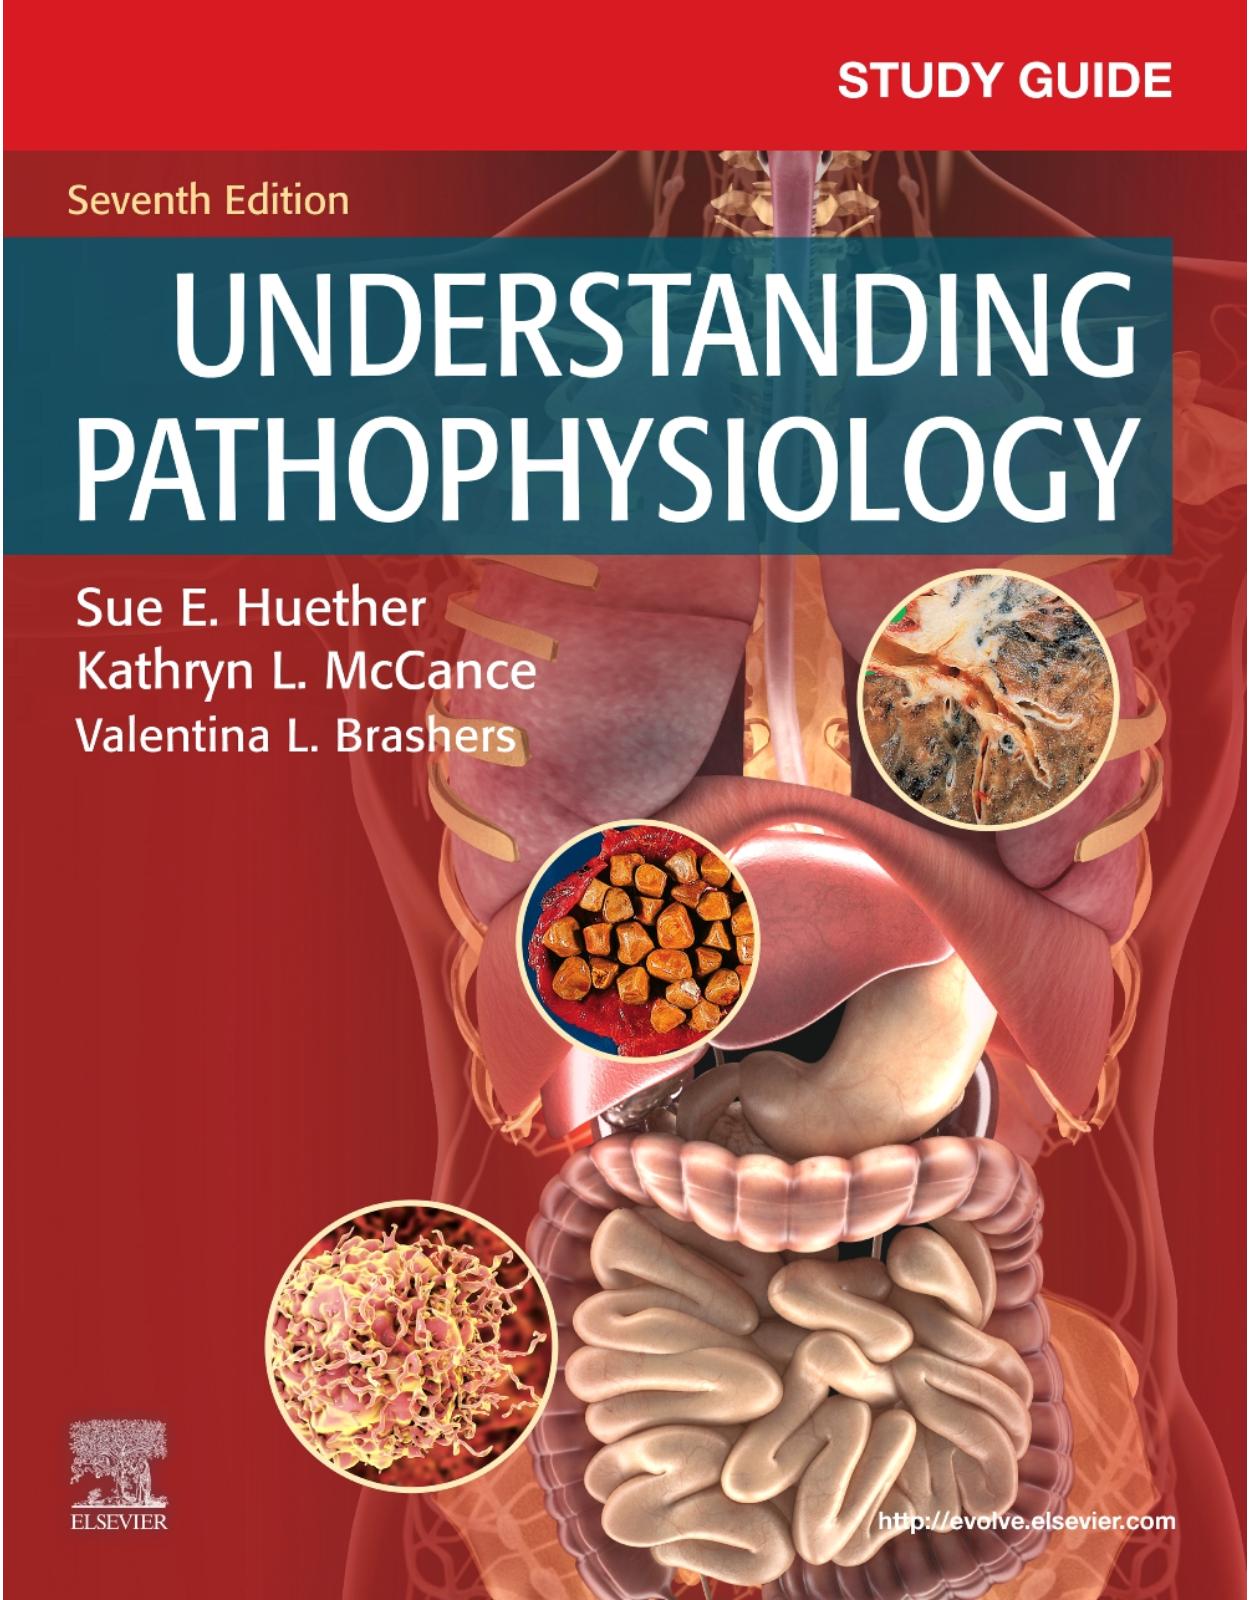 Study Guide for Understanding Pathophysiology, 7th Edition